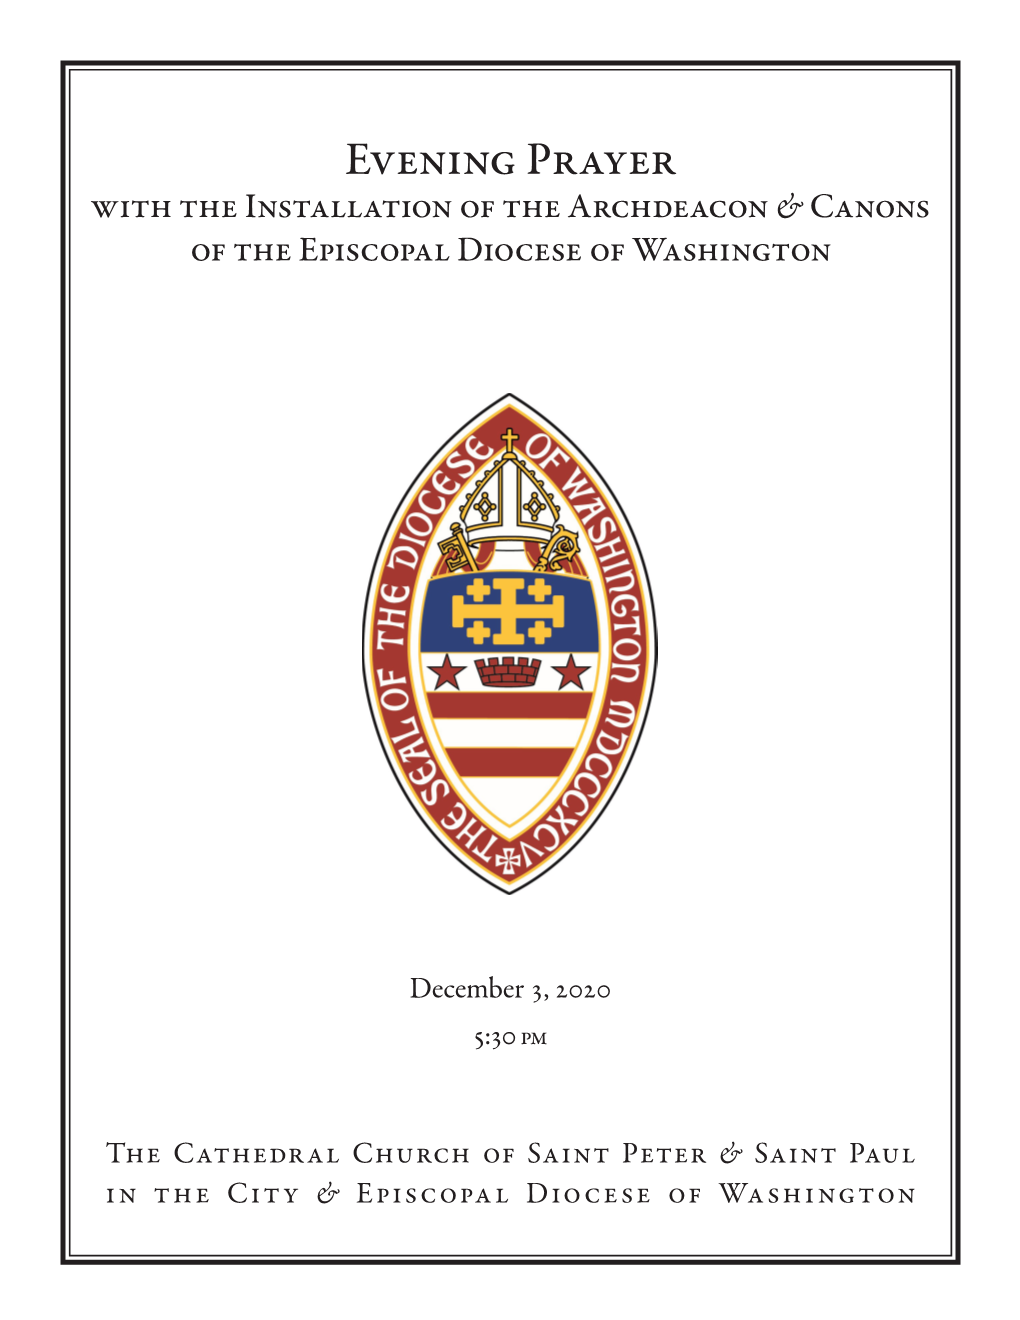 Evening Prayer with the Installation of the Archdeacon & Canons of the Episcopal Diocese of Washington